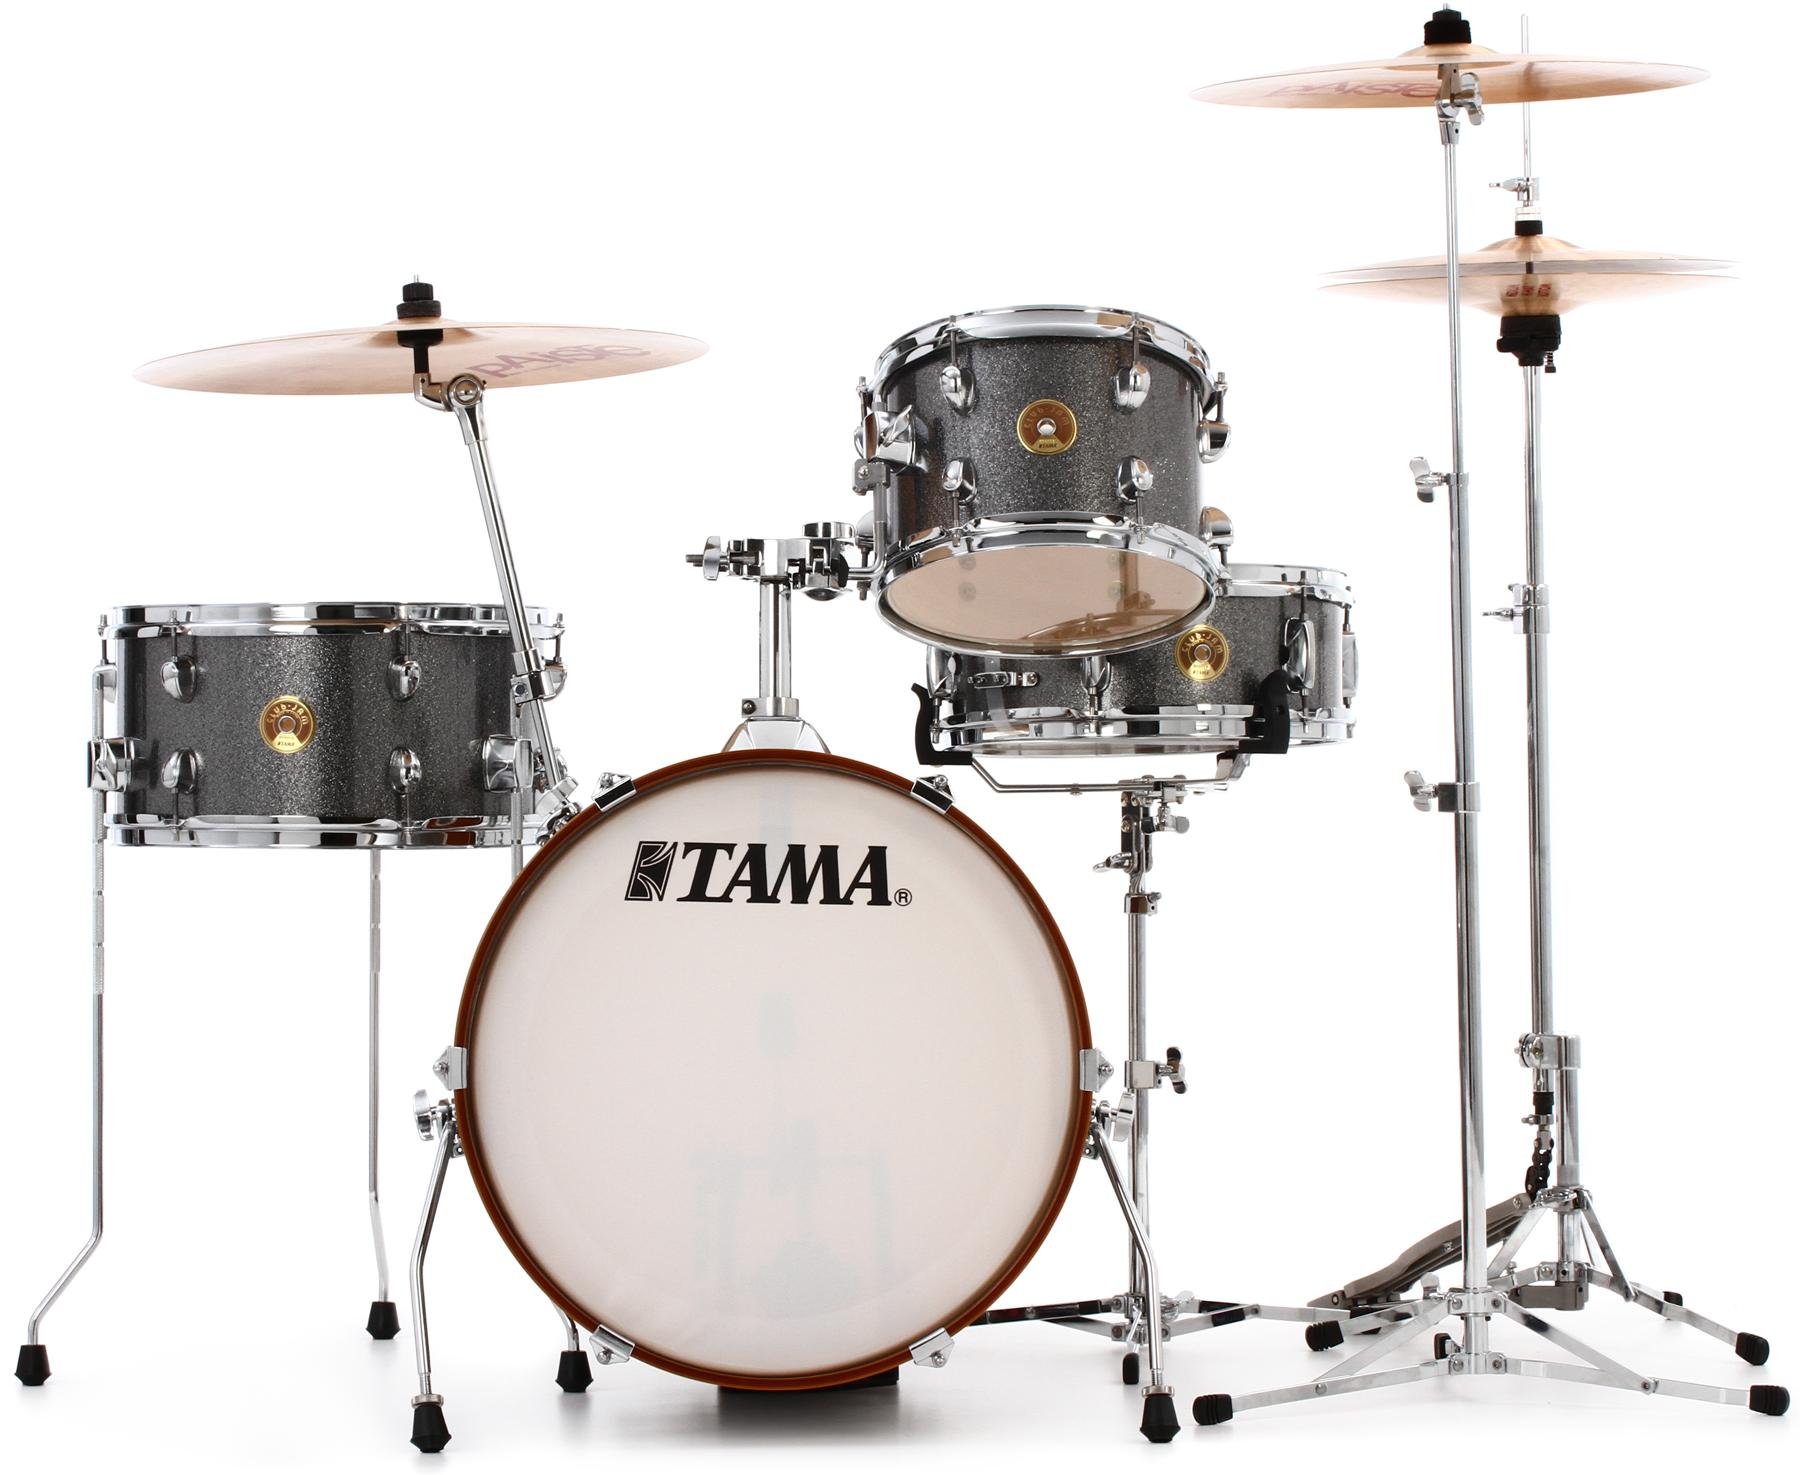 Tama Club-JAM LJK48S 4-piece Shell Pack with Snare Drum - Galaxy Silver |  Sweetwater